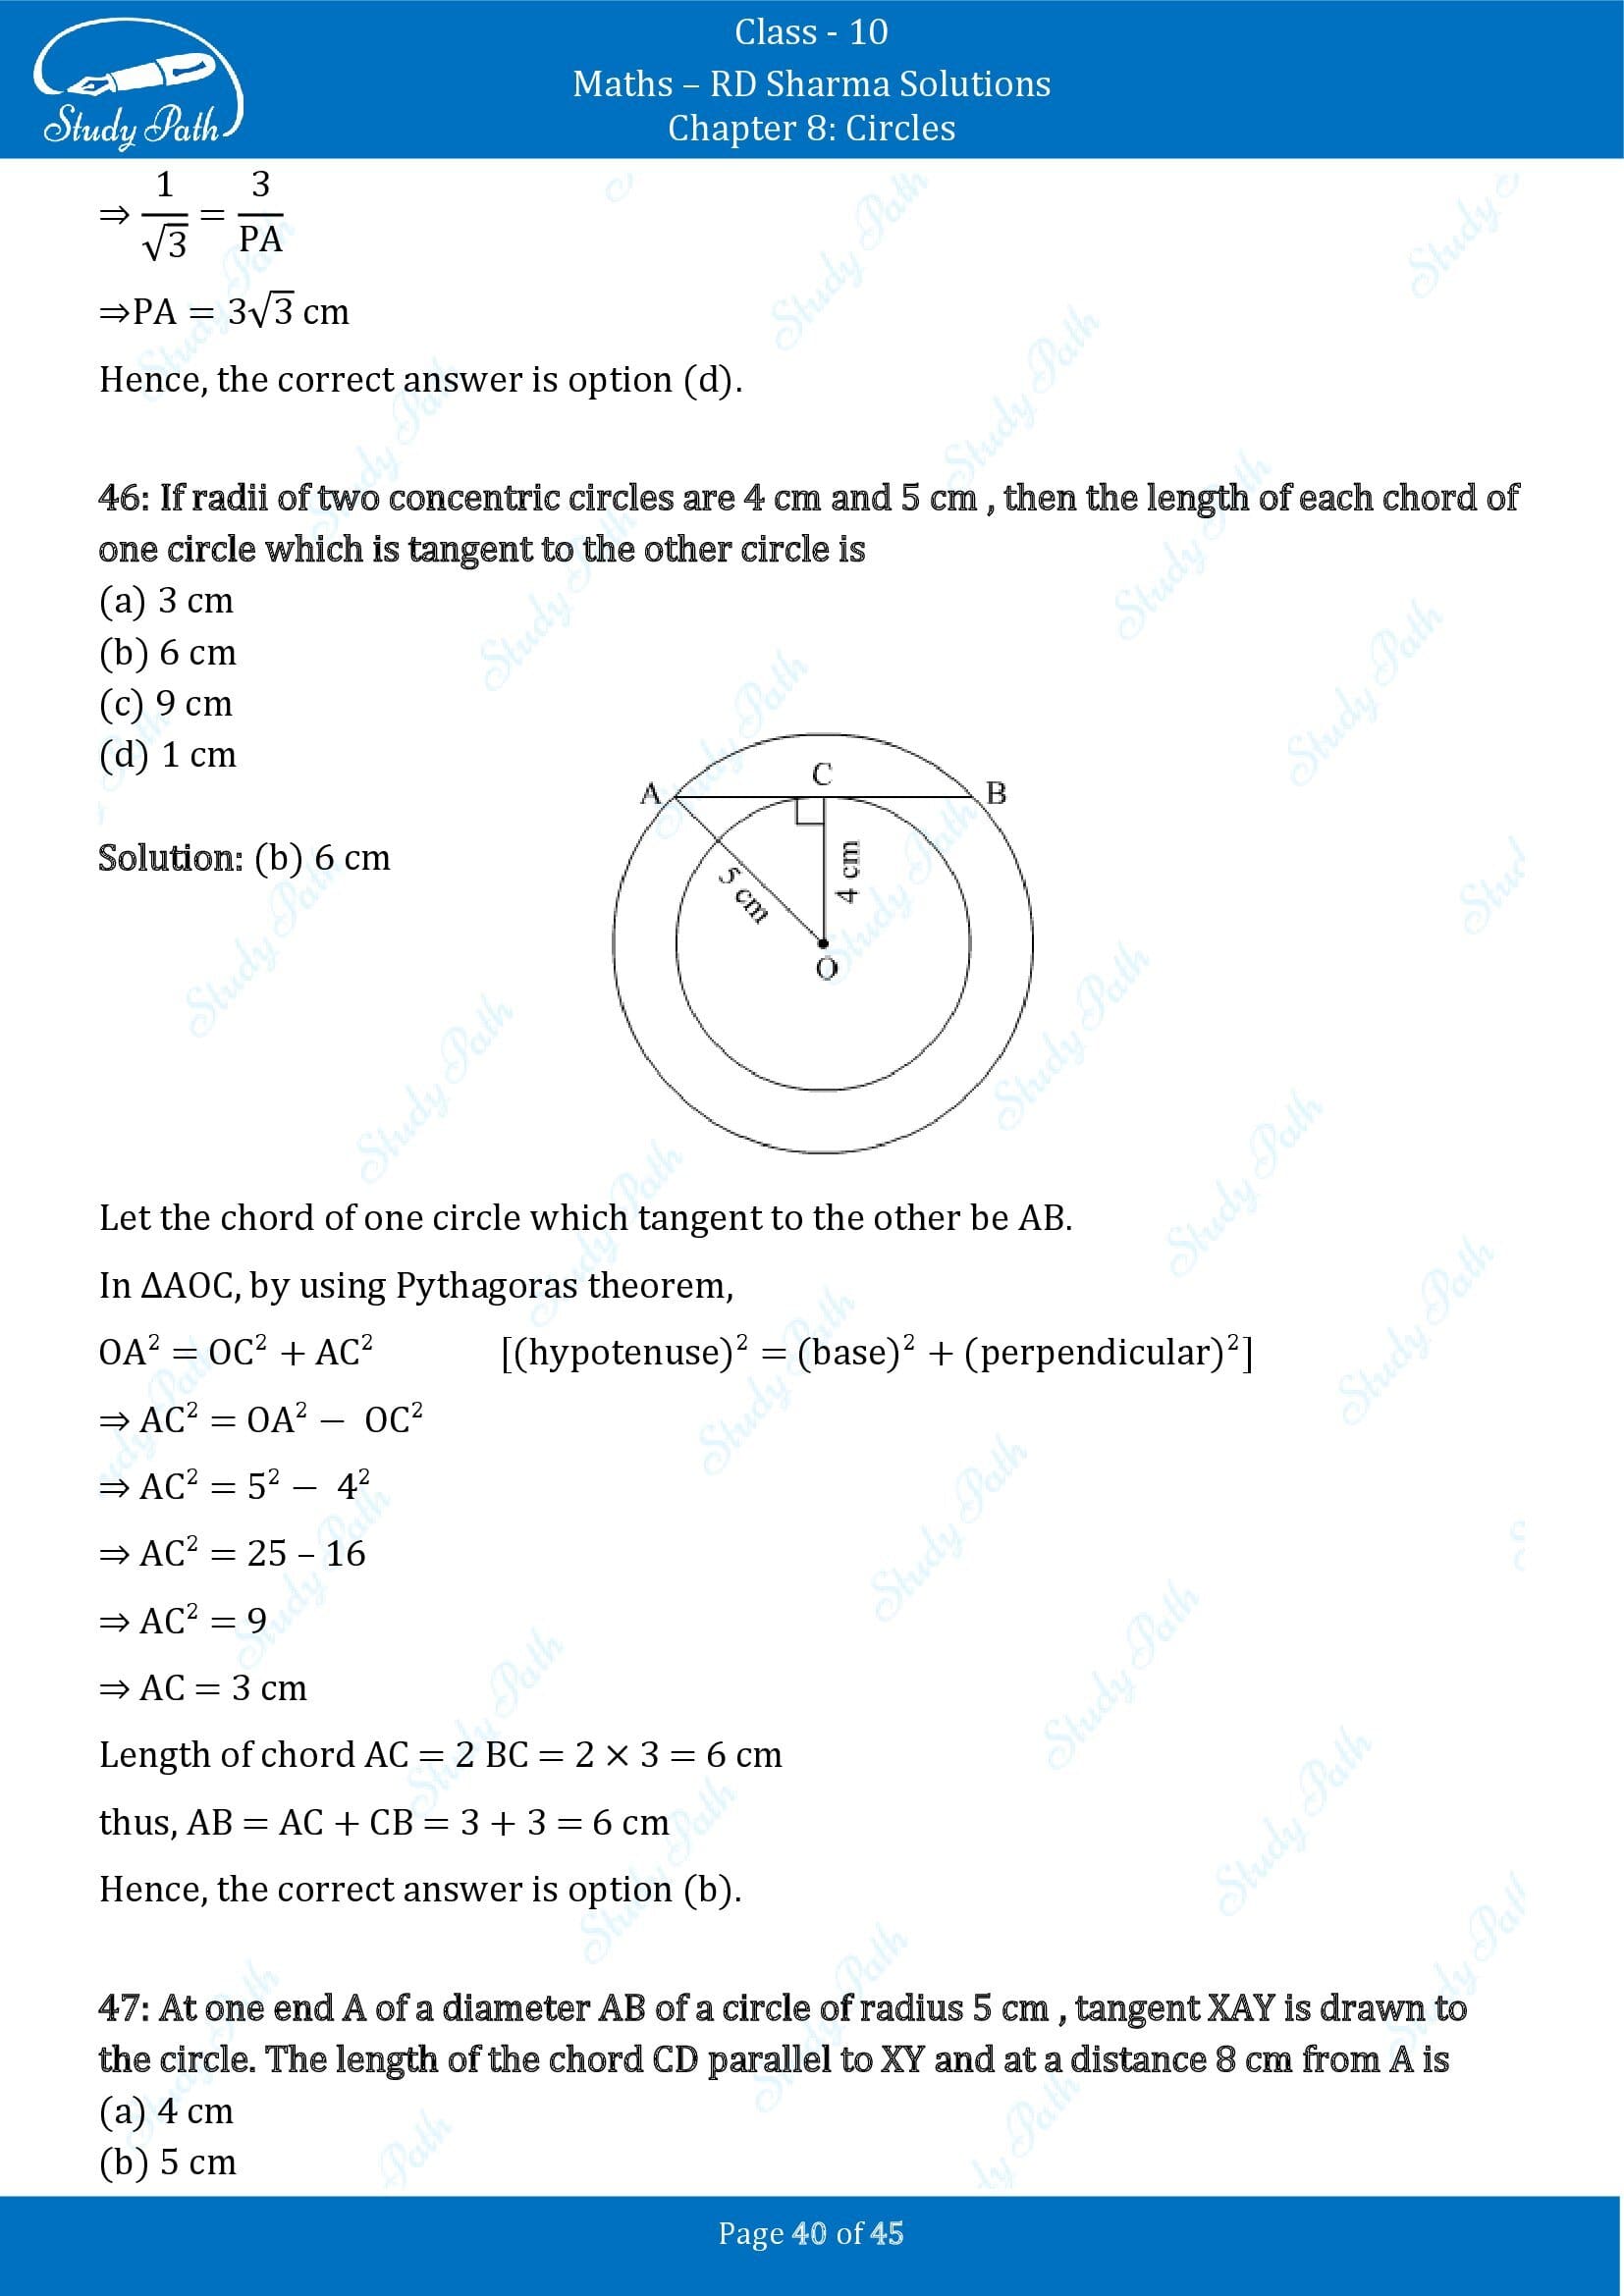 RD Sharma Solutions Class 10 Chapter 8 Circles Multiple Choice Questions MCQs 00040